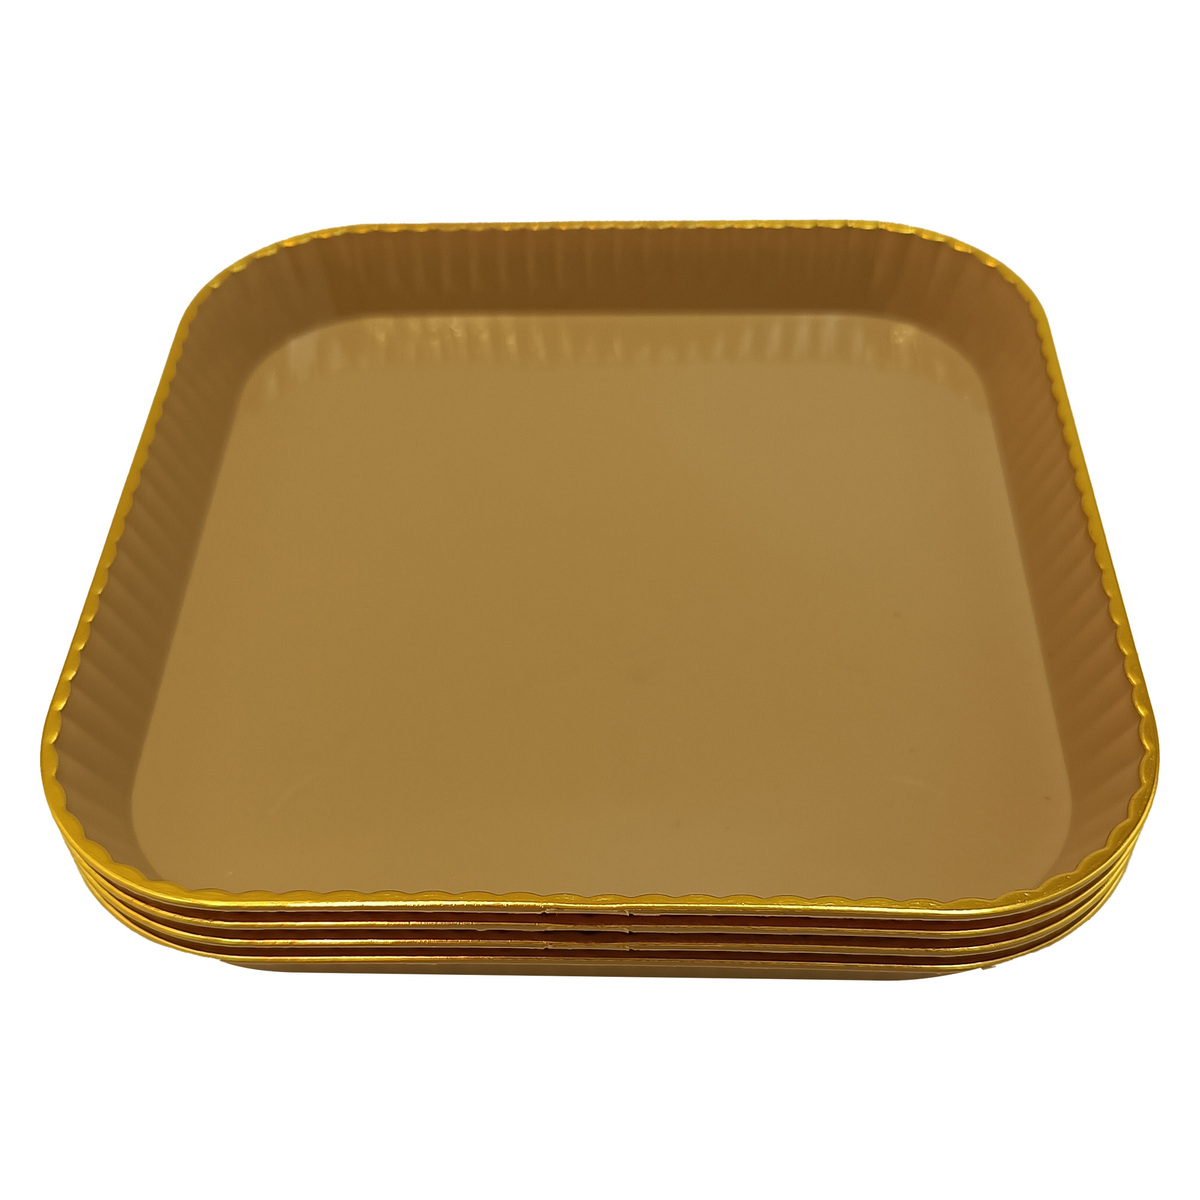 Home Plastic Serving Tray, 15 x 15 cm, 2622 MKT